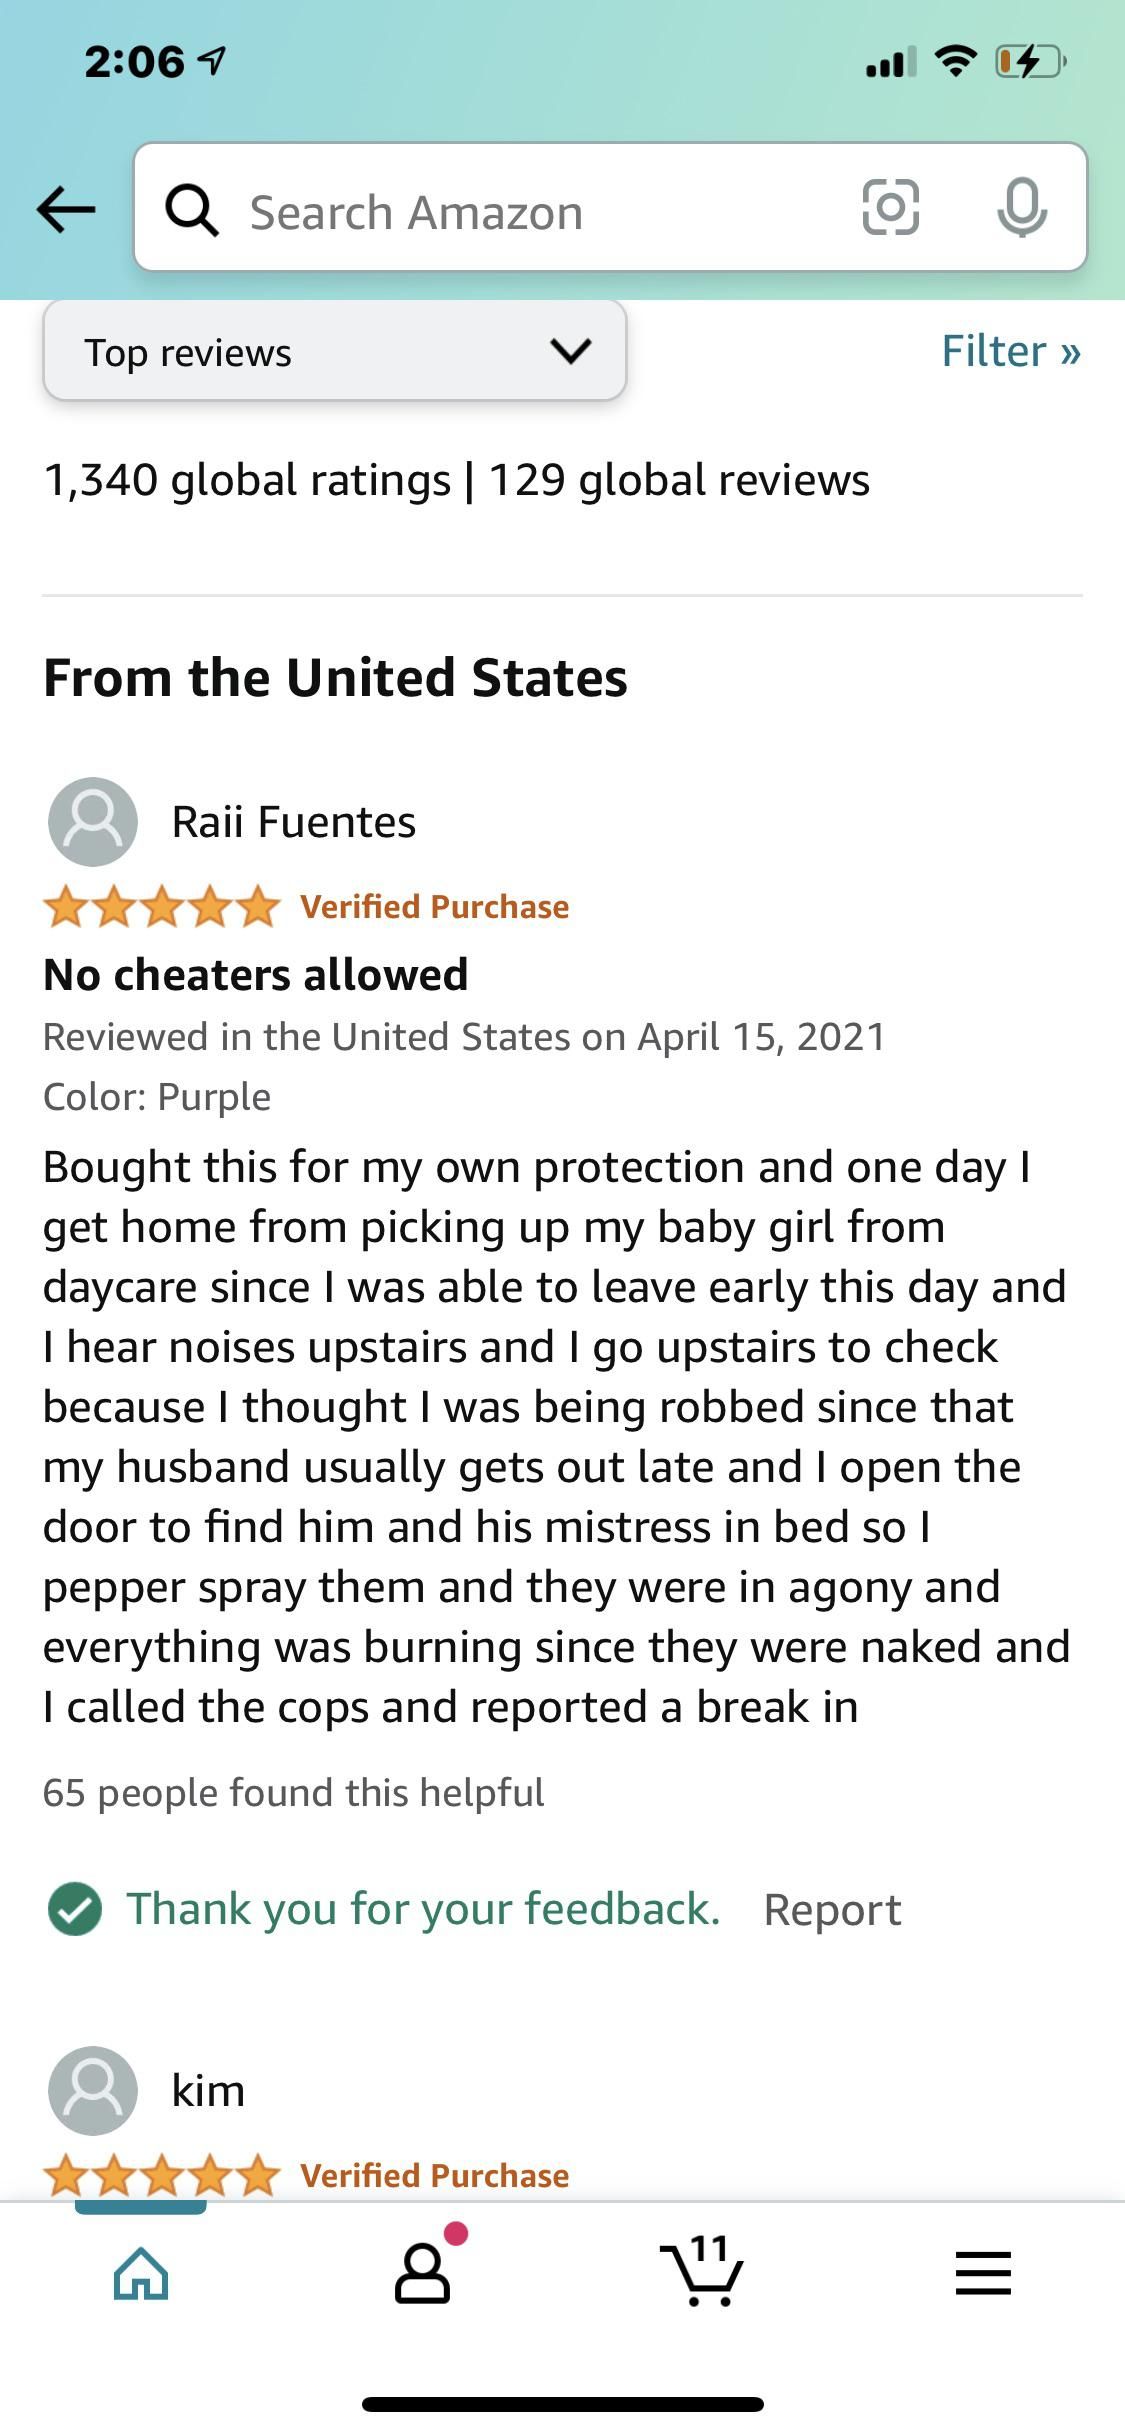 Looking for pepper spray on Amazon and found this review. Happy to hear it’s a quality product.